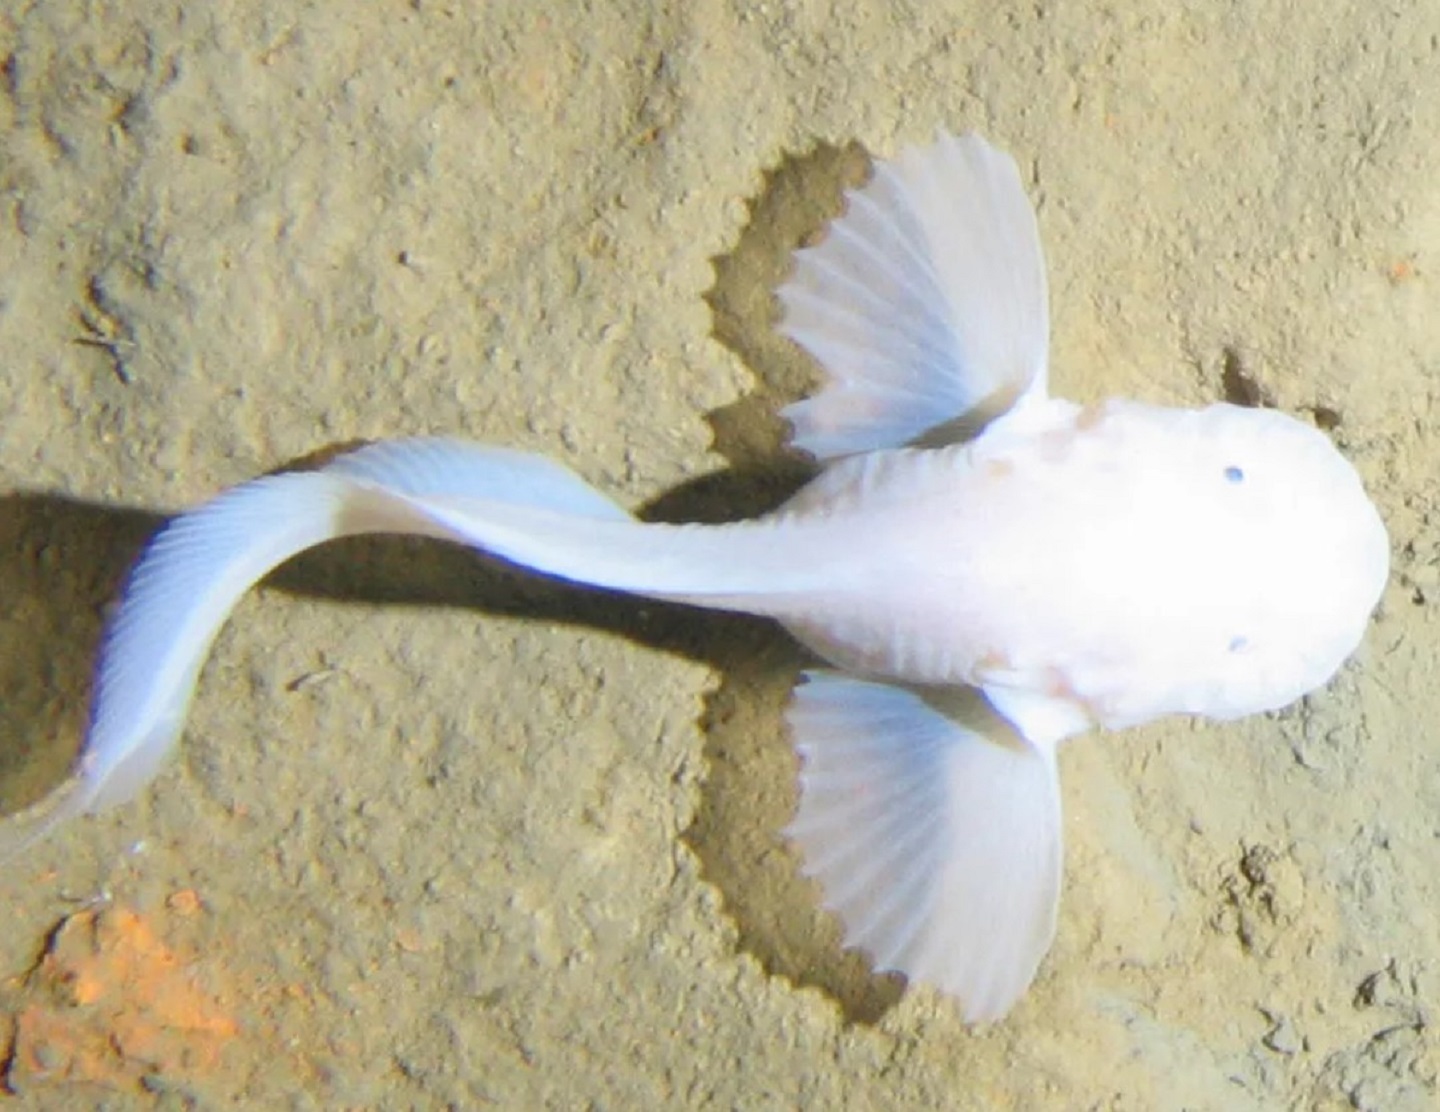 The snailfish that inspired the robot. Alan Jamieson, Author provided (No reuse)